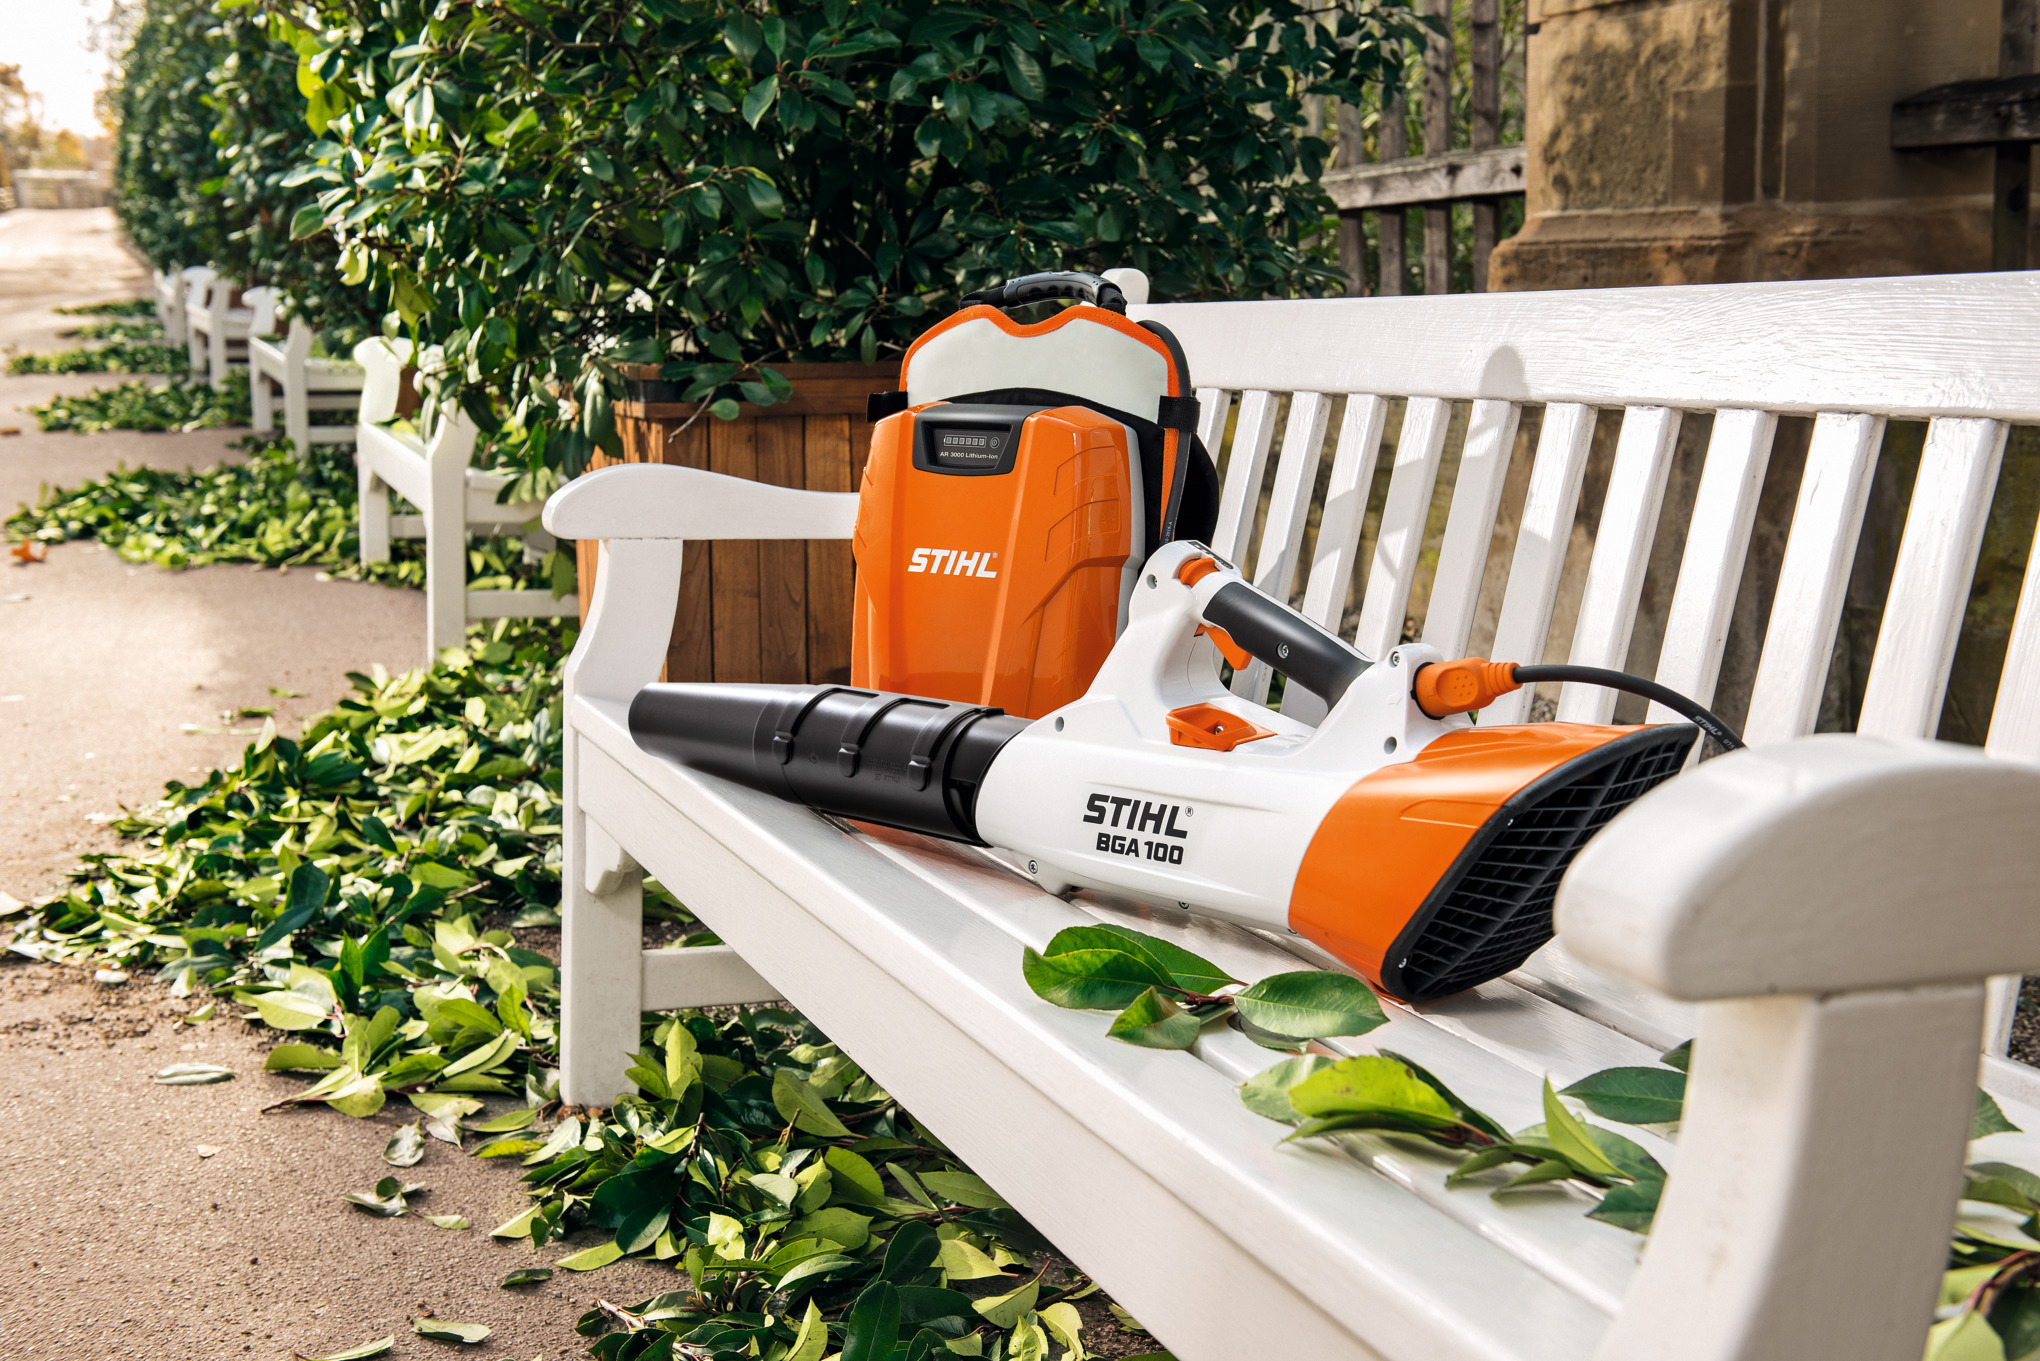 STIHL leaf blower and battery on a white bench